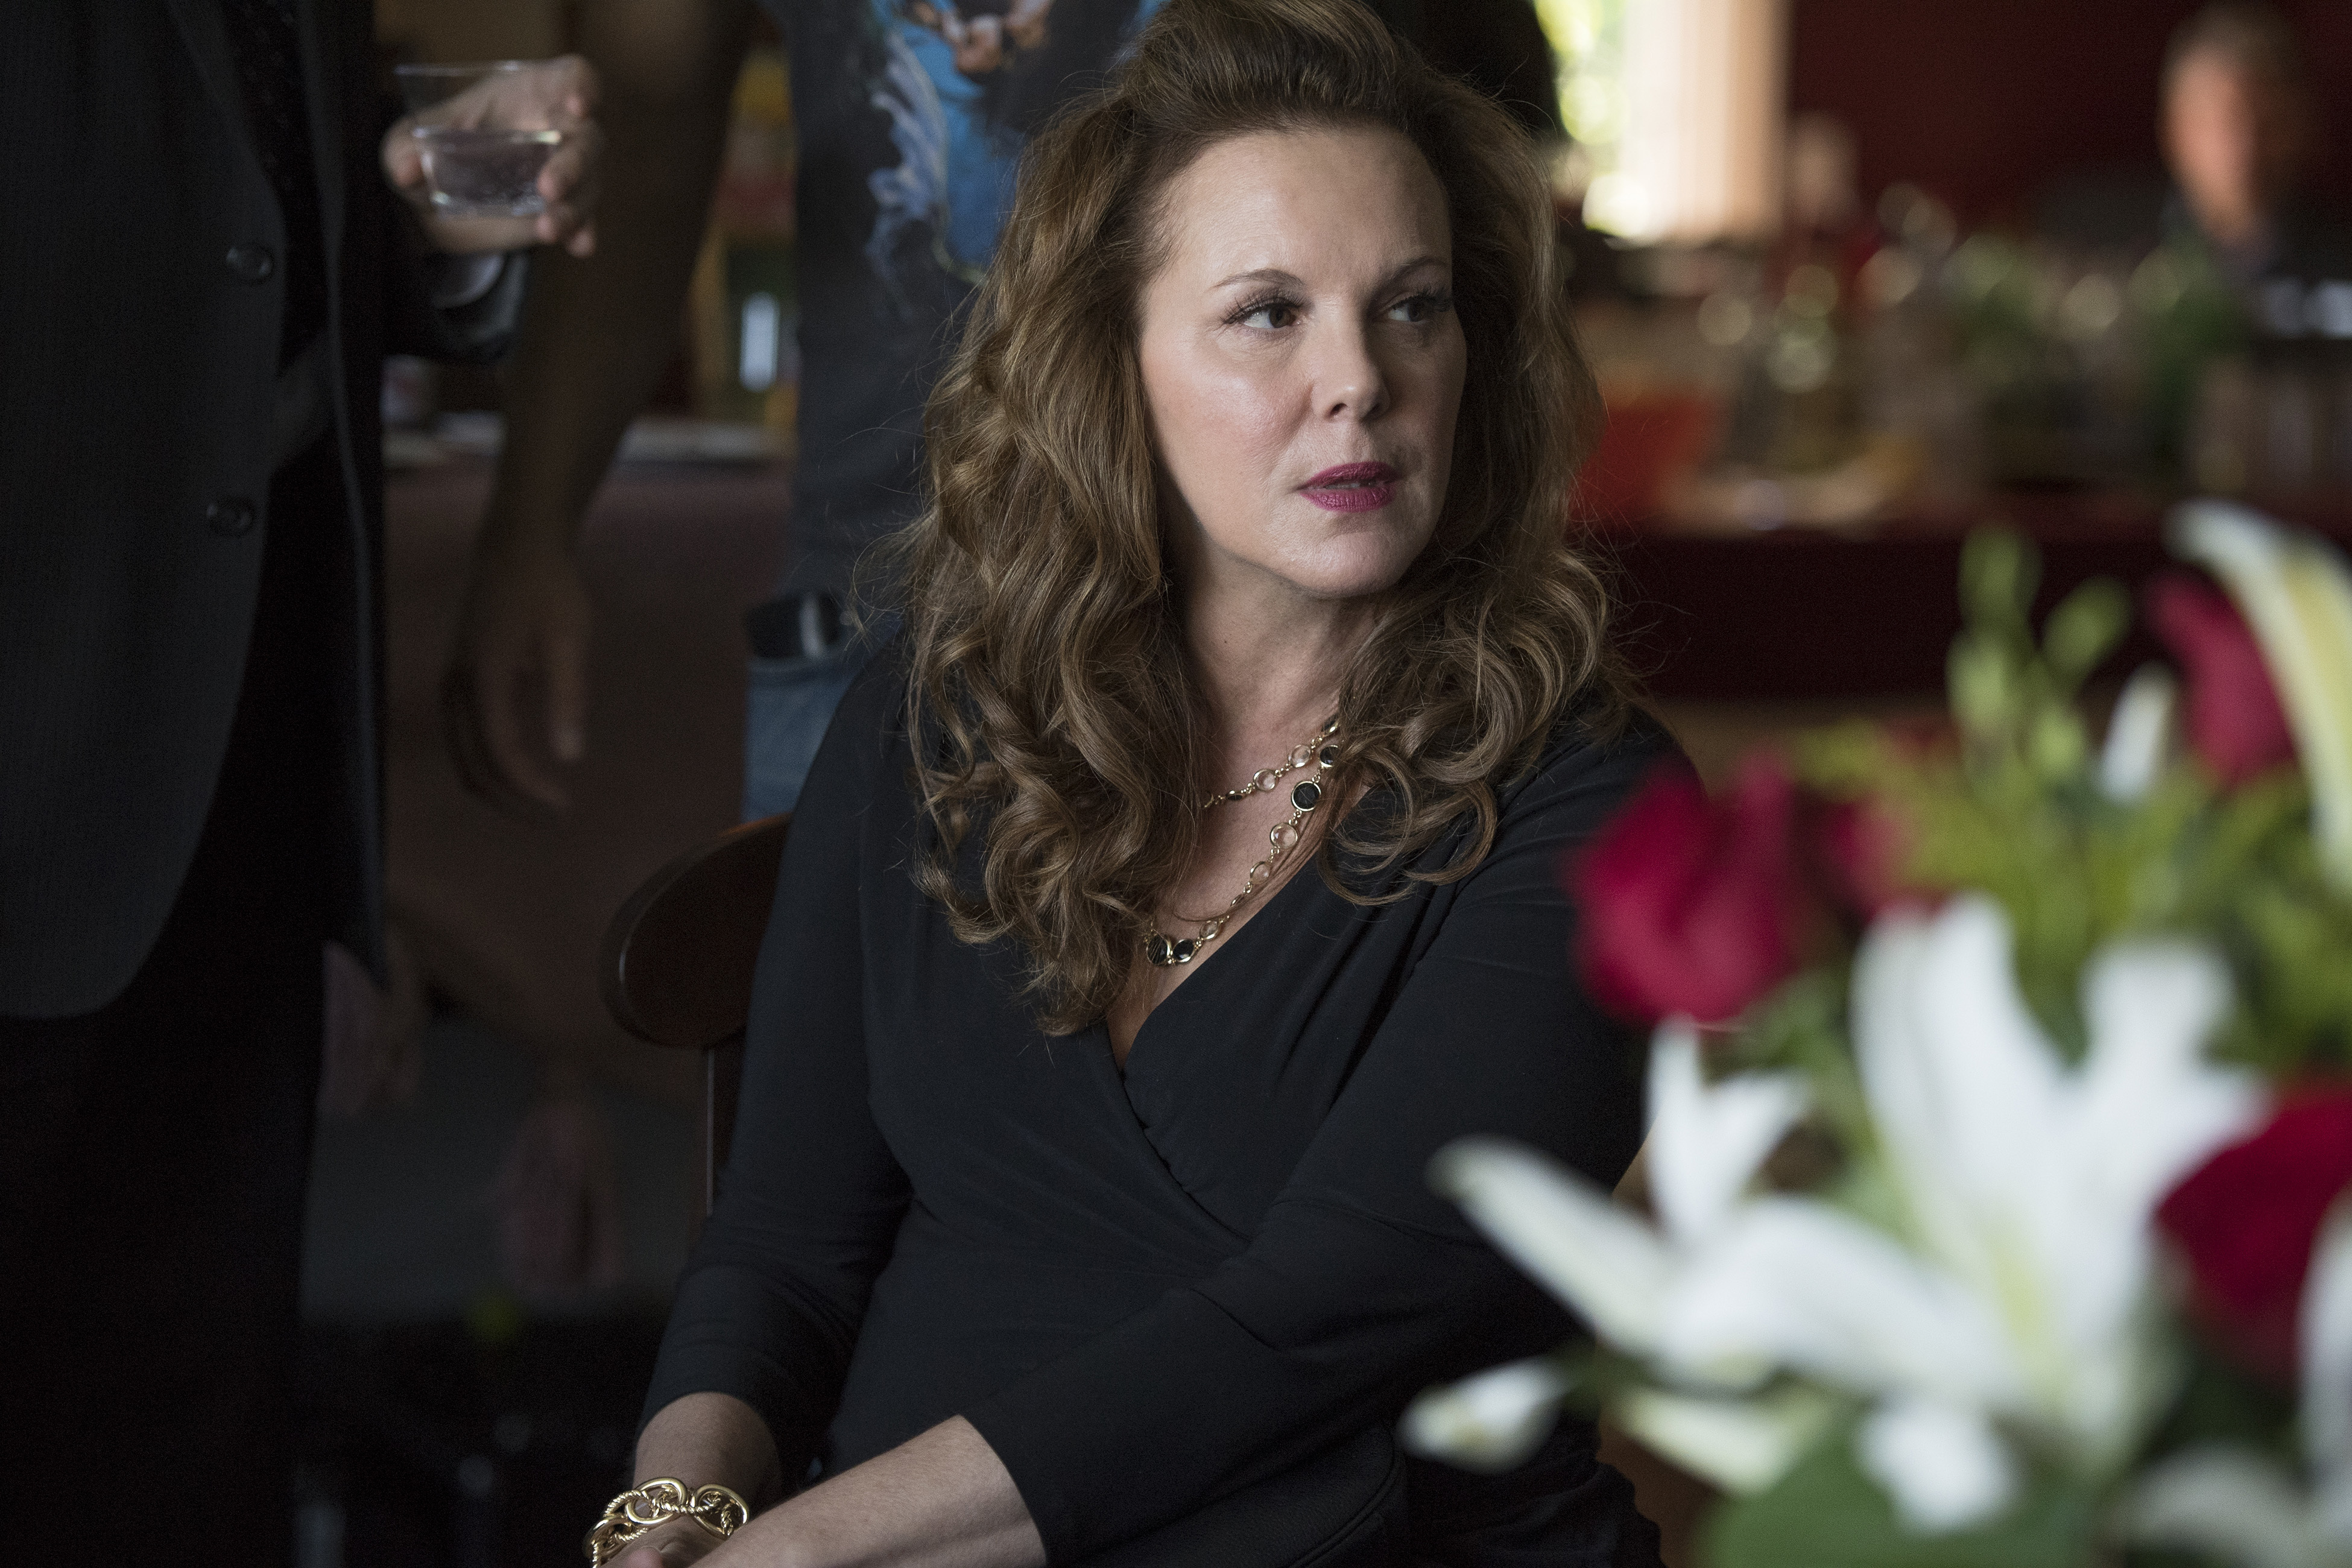 ART OF THE CUT with the editors of HBO's Big Little Lies and Sharp Objects 2